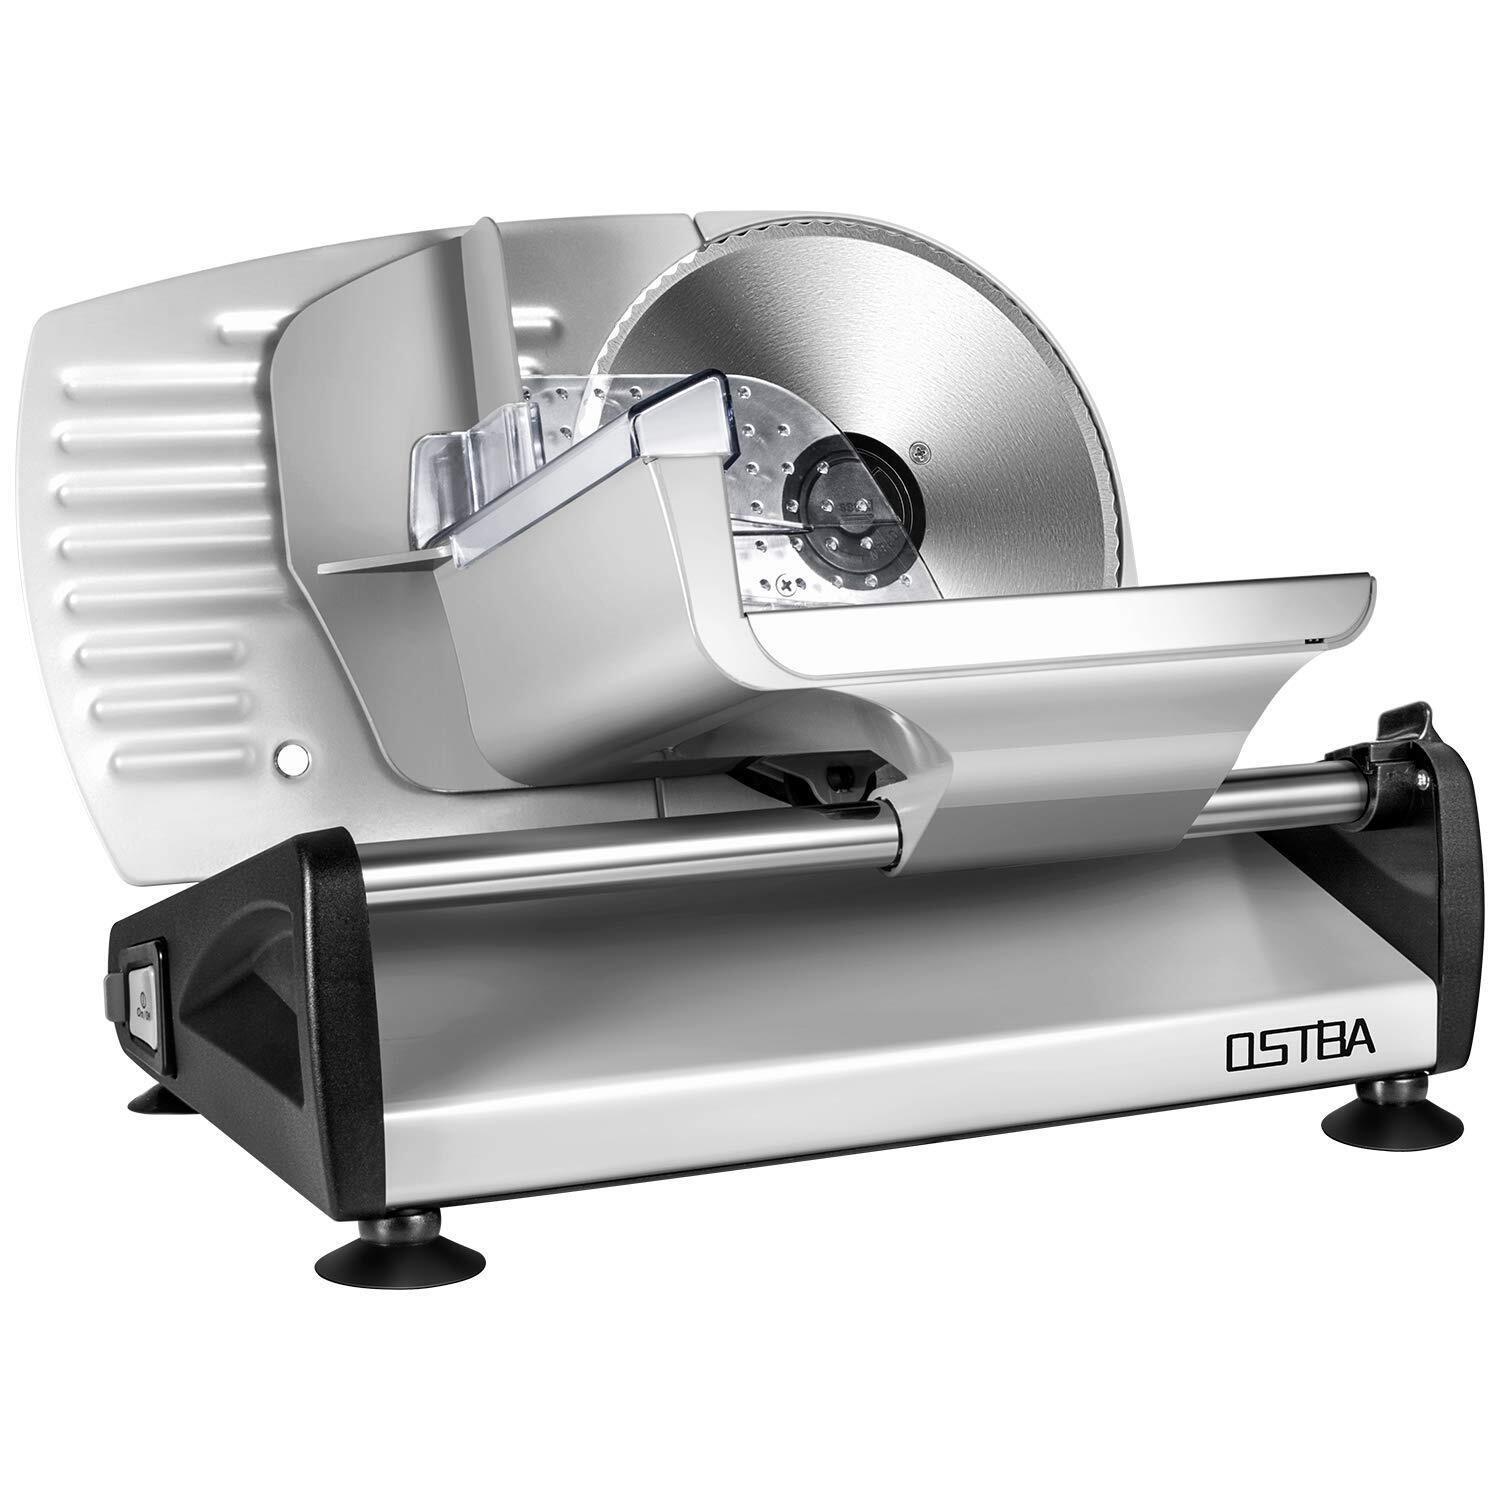 200W Electric Deli Meat Slicer, 7.5" Removable